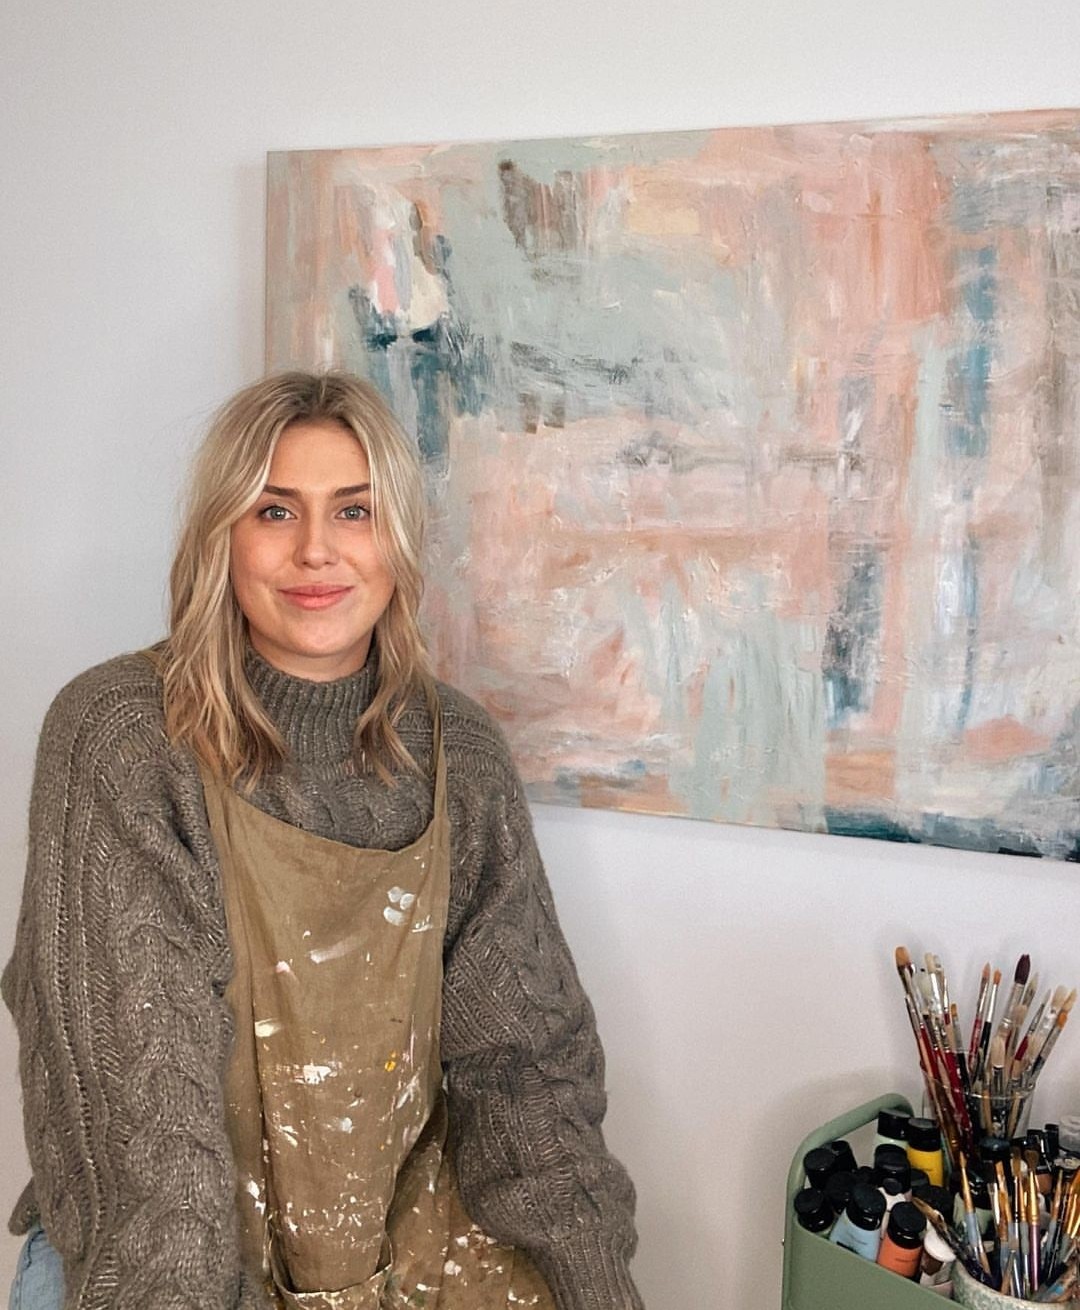 Ally S next to one of her paintings